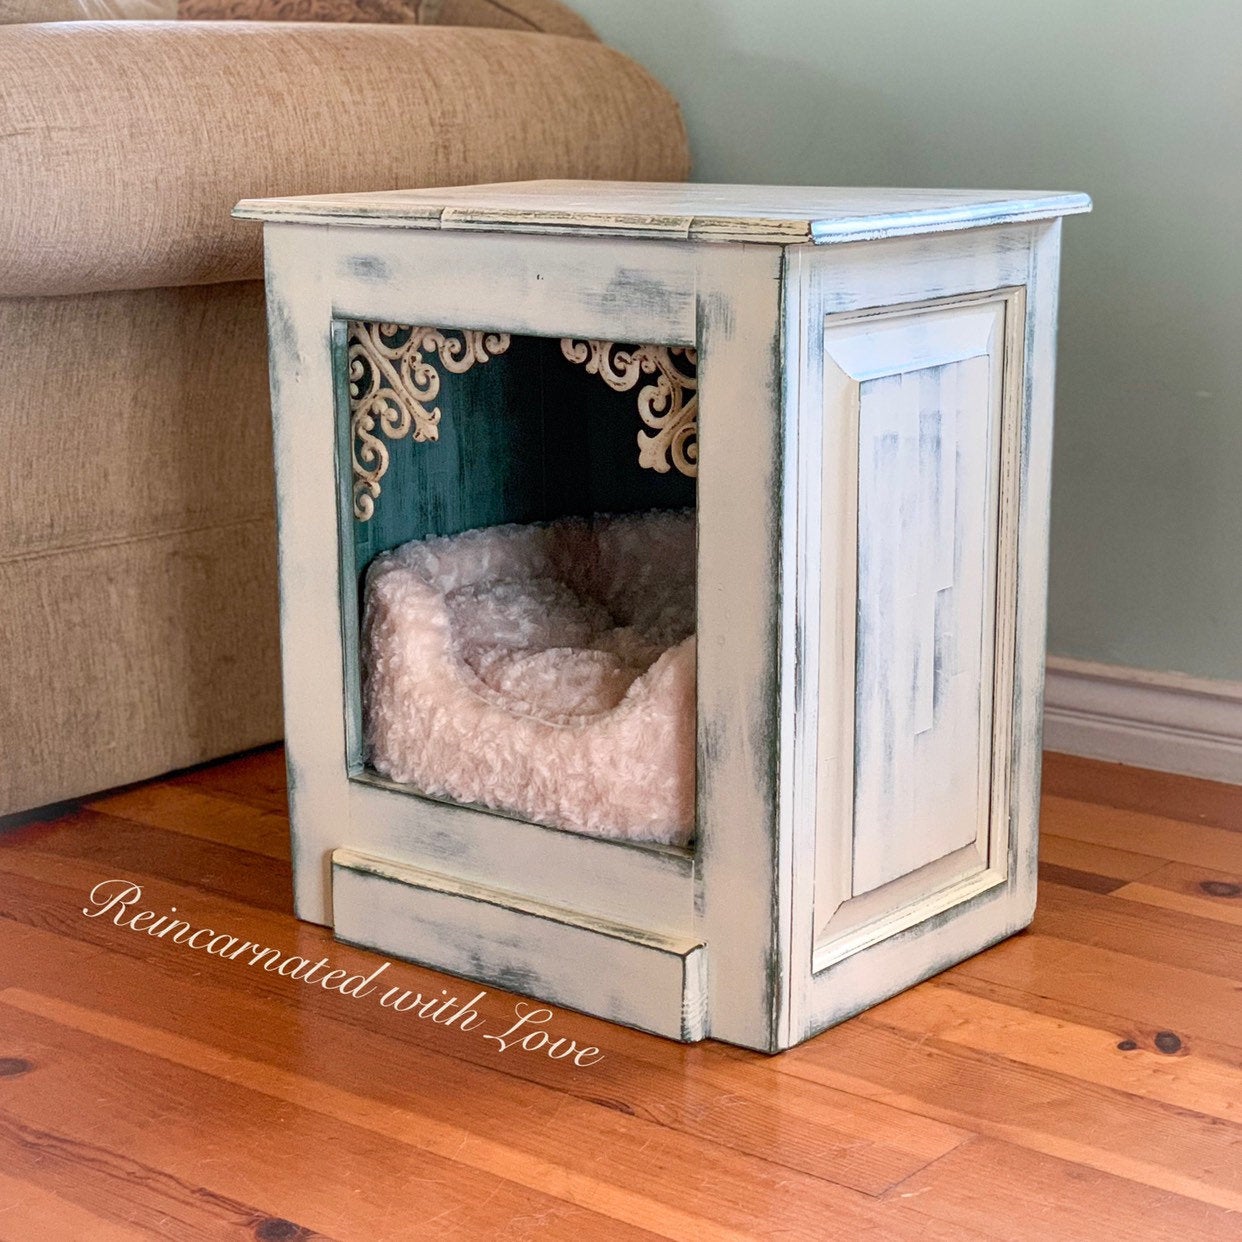 An upcycled, end table with the front, cabinet door removed & a pet bed added, painted in an off white with green undertones.